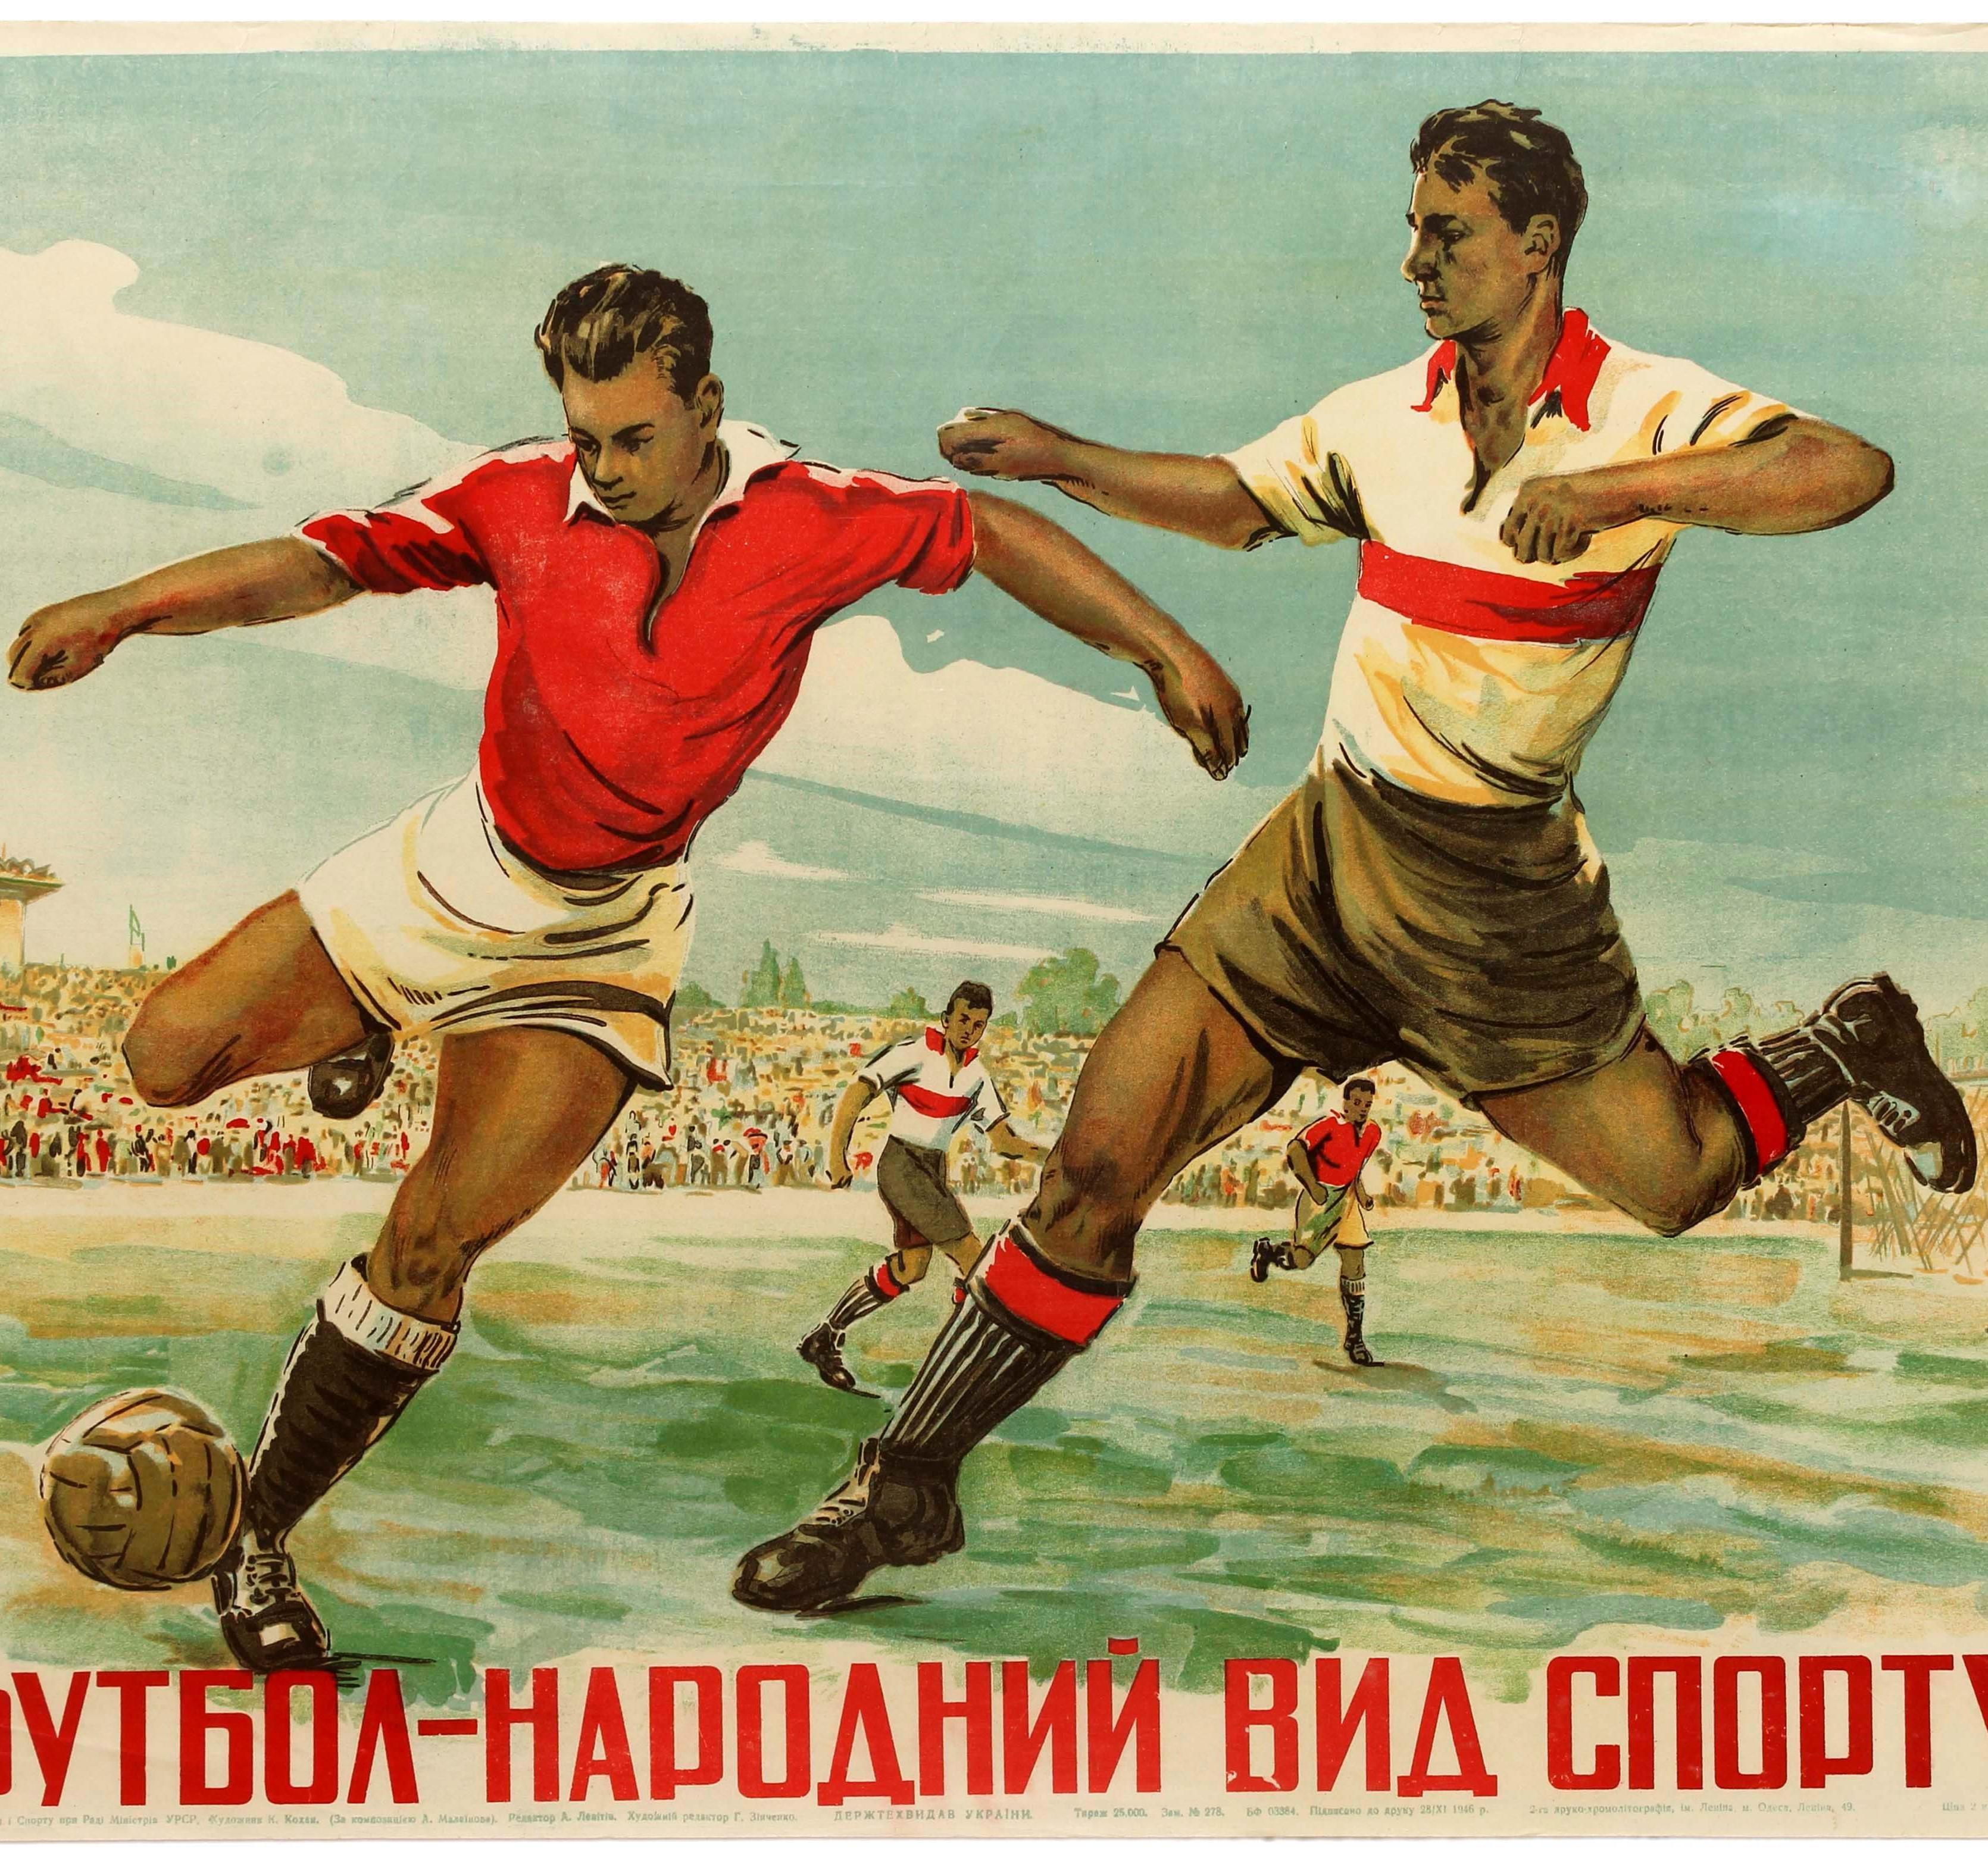 Original vintage Soviet sport poster promoting football as a national sport featuring a football match with players from each team running to kick the ball during a match in front of a stadium full of supporters with other footballers on the pitch